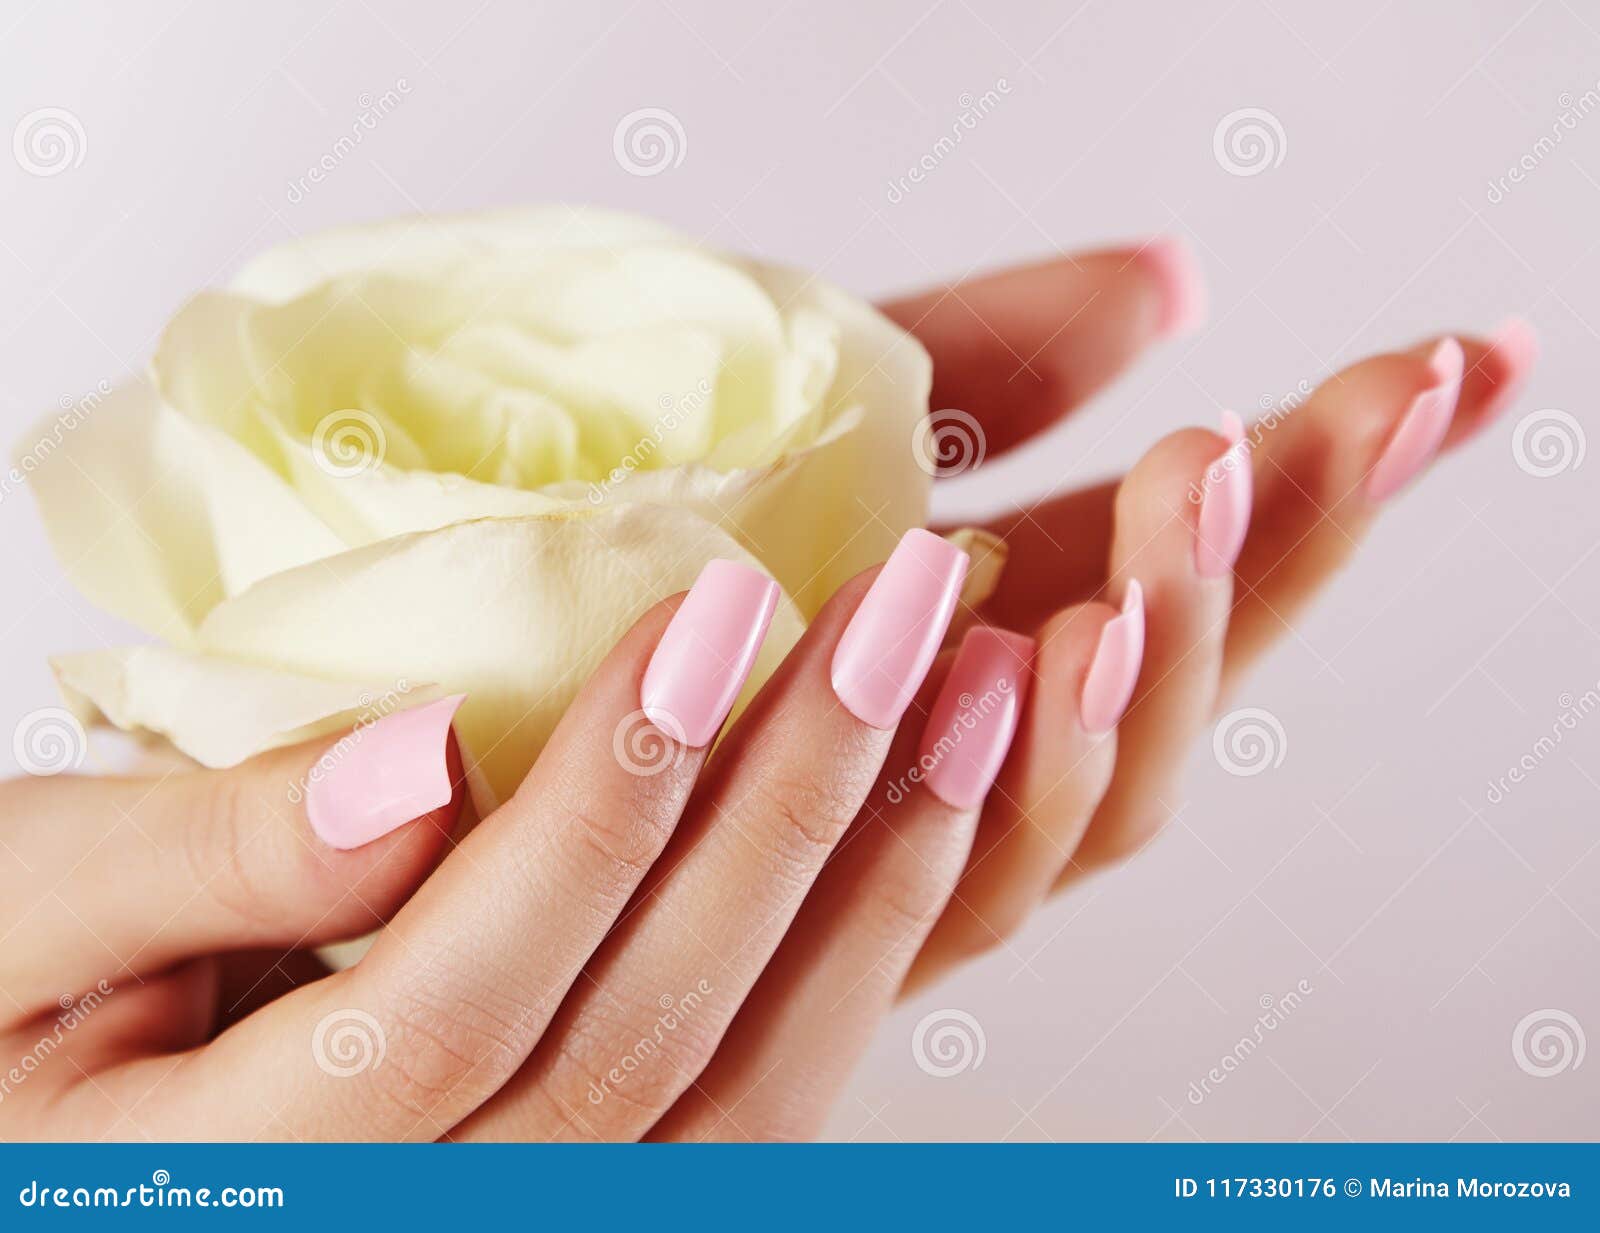 elegant female hands with pink manicured nails. beautiful fingers holding rose flower. gentle manicure with light polish